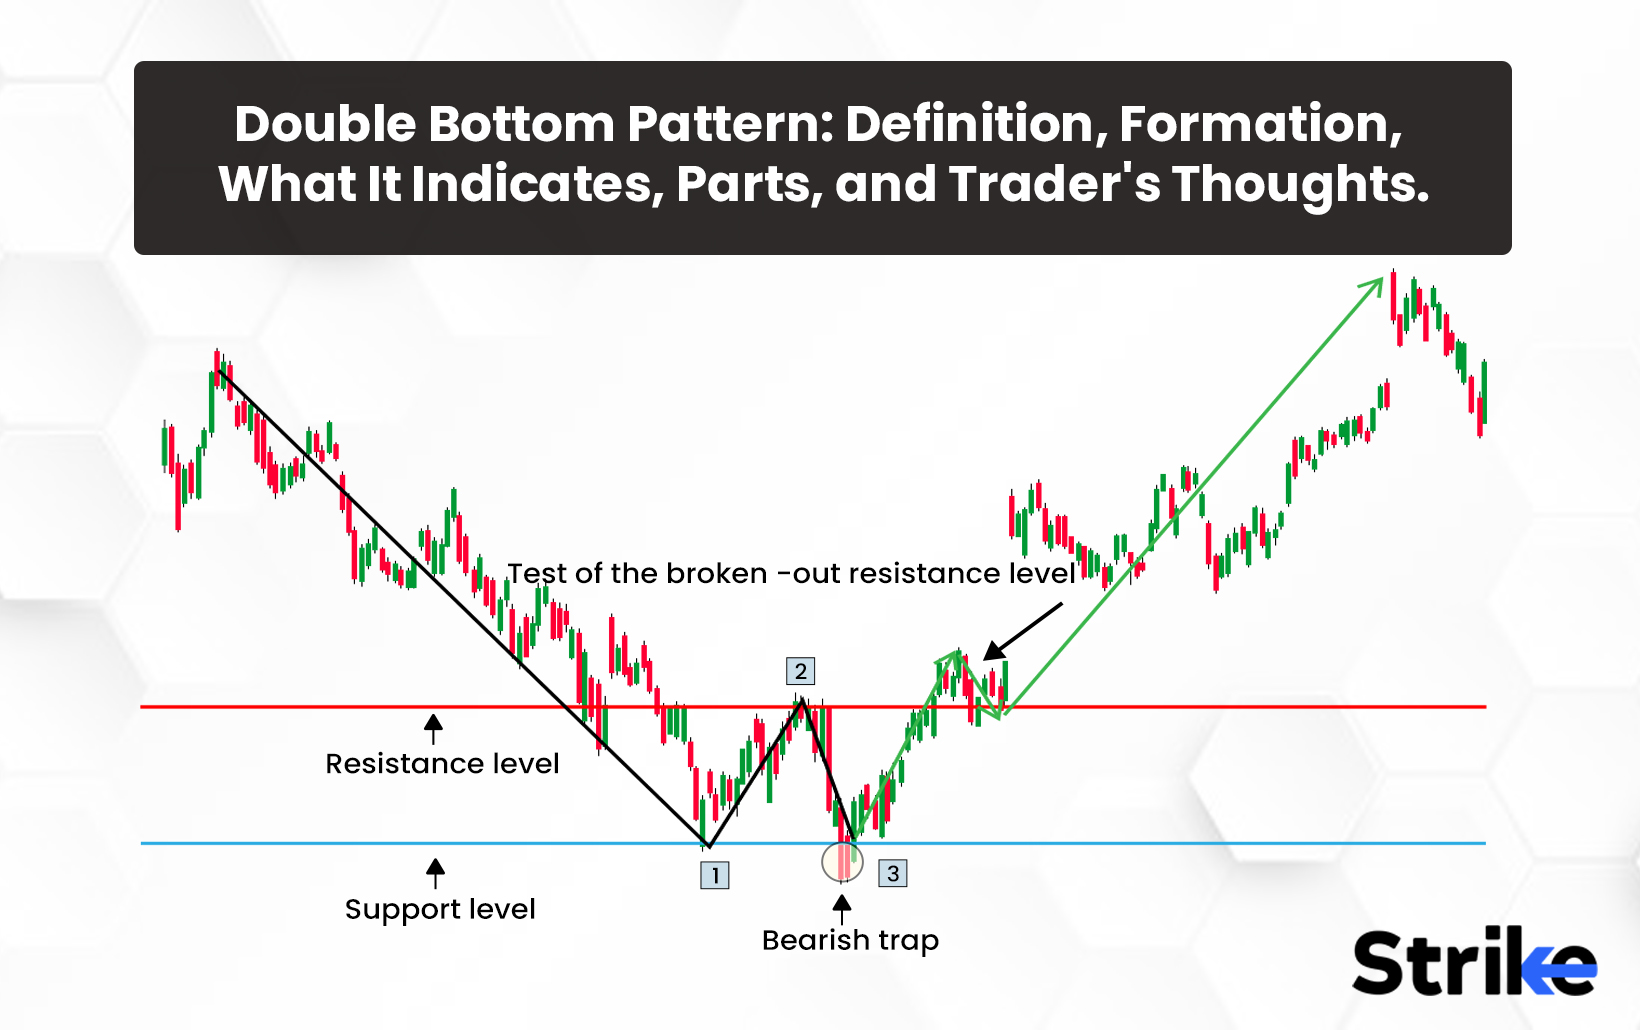 Double Bottom Pattern: Definition, Formation, What It Indicates, Parts, and Trader’s Thoughts